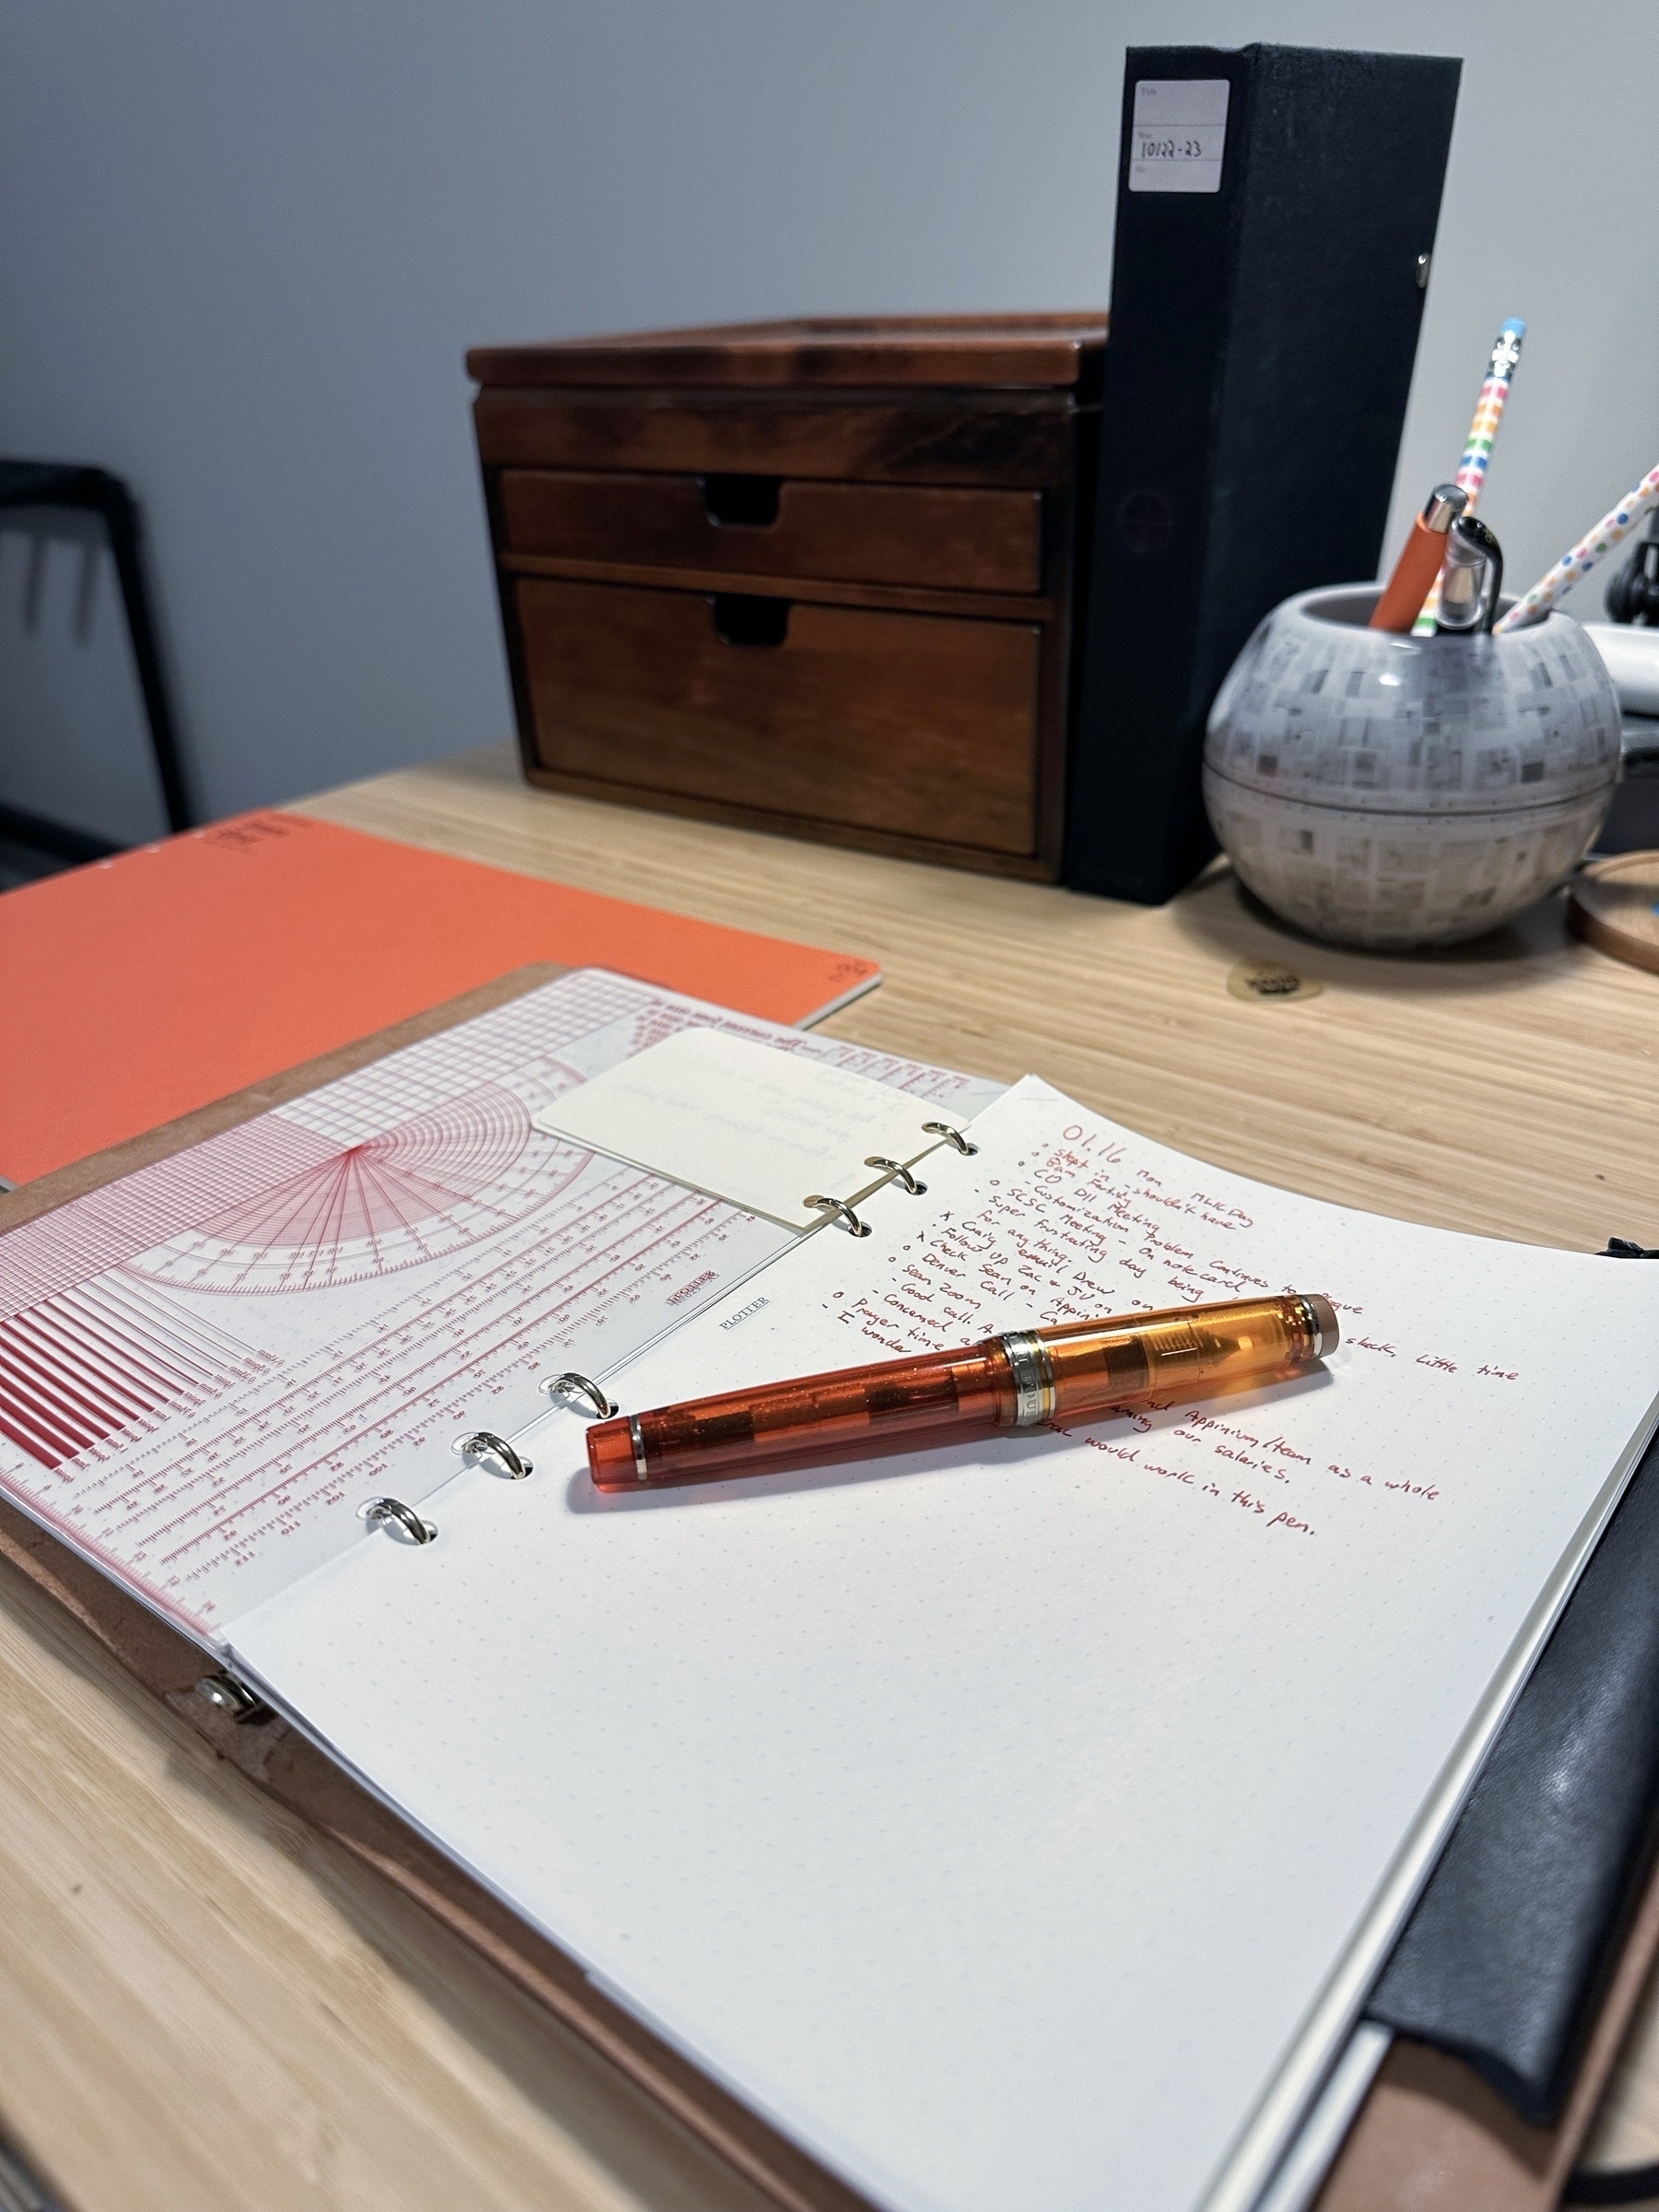 Notebook and fountain pen on desk